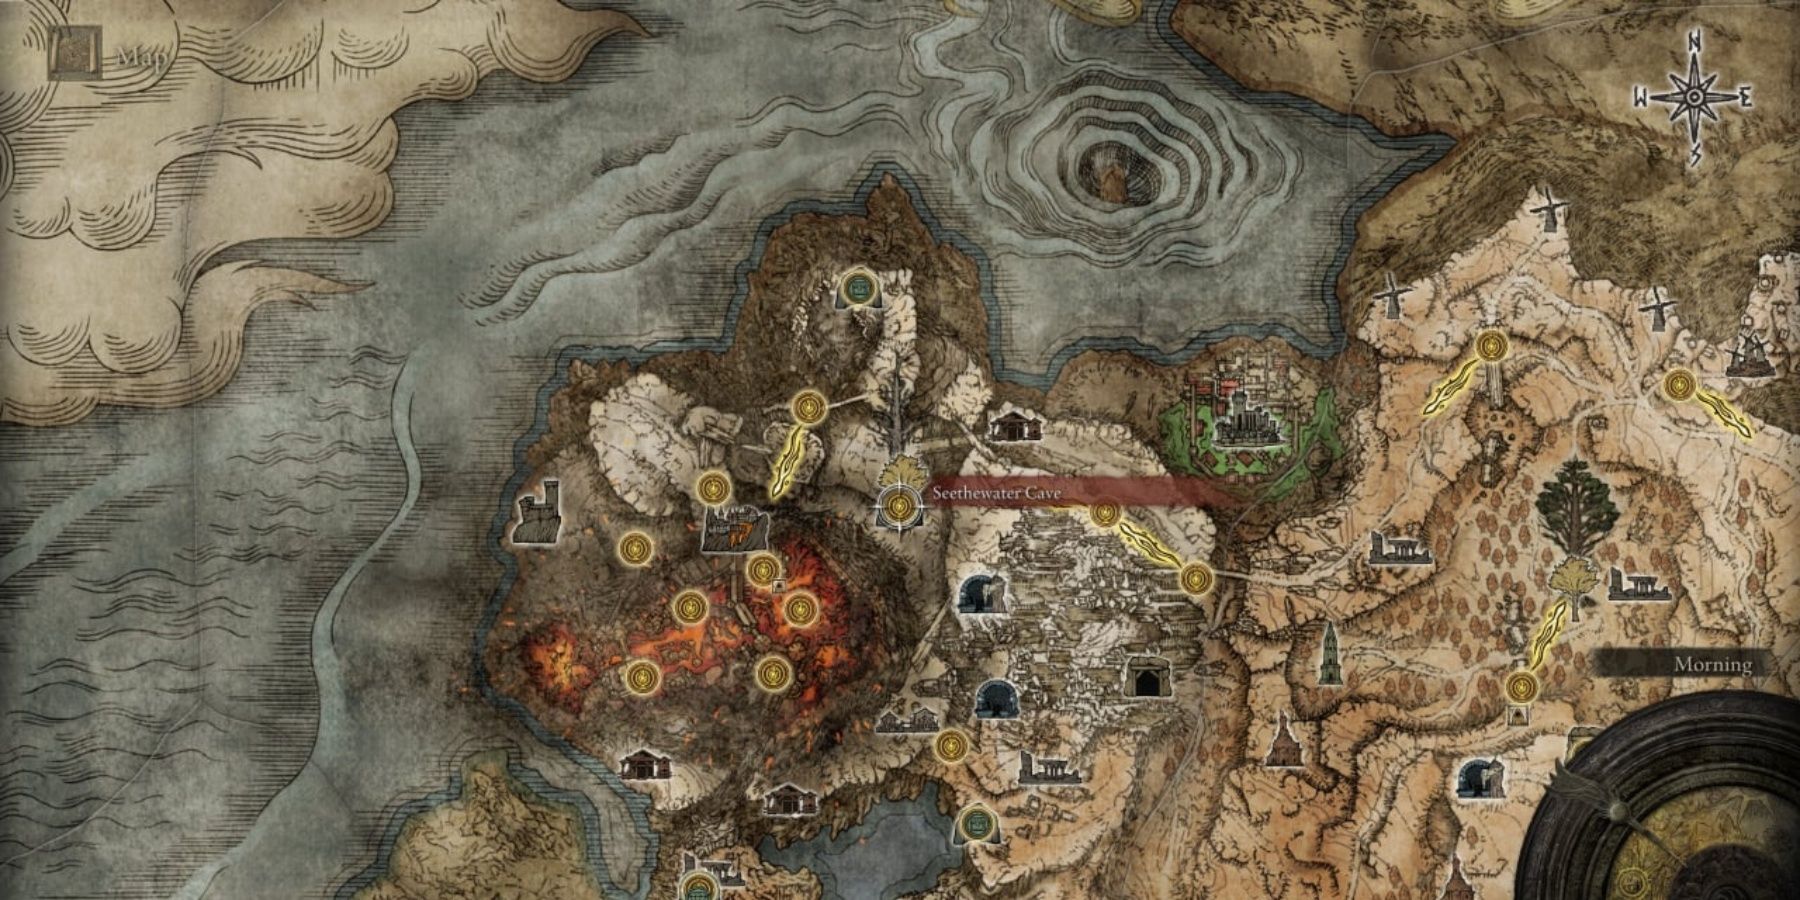 Seethewater Cave in elden ring map